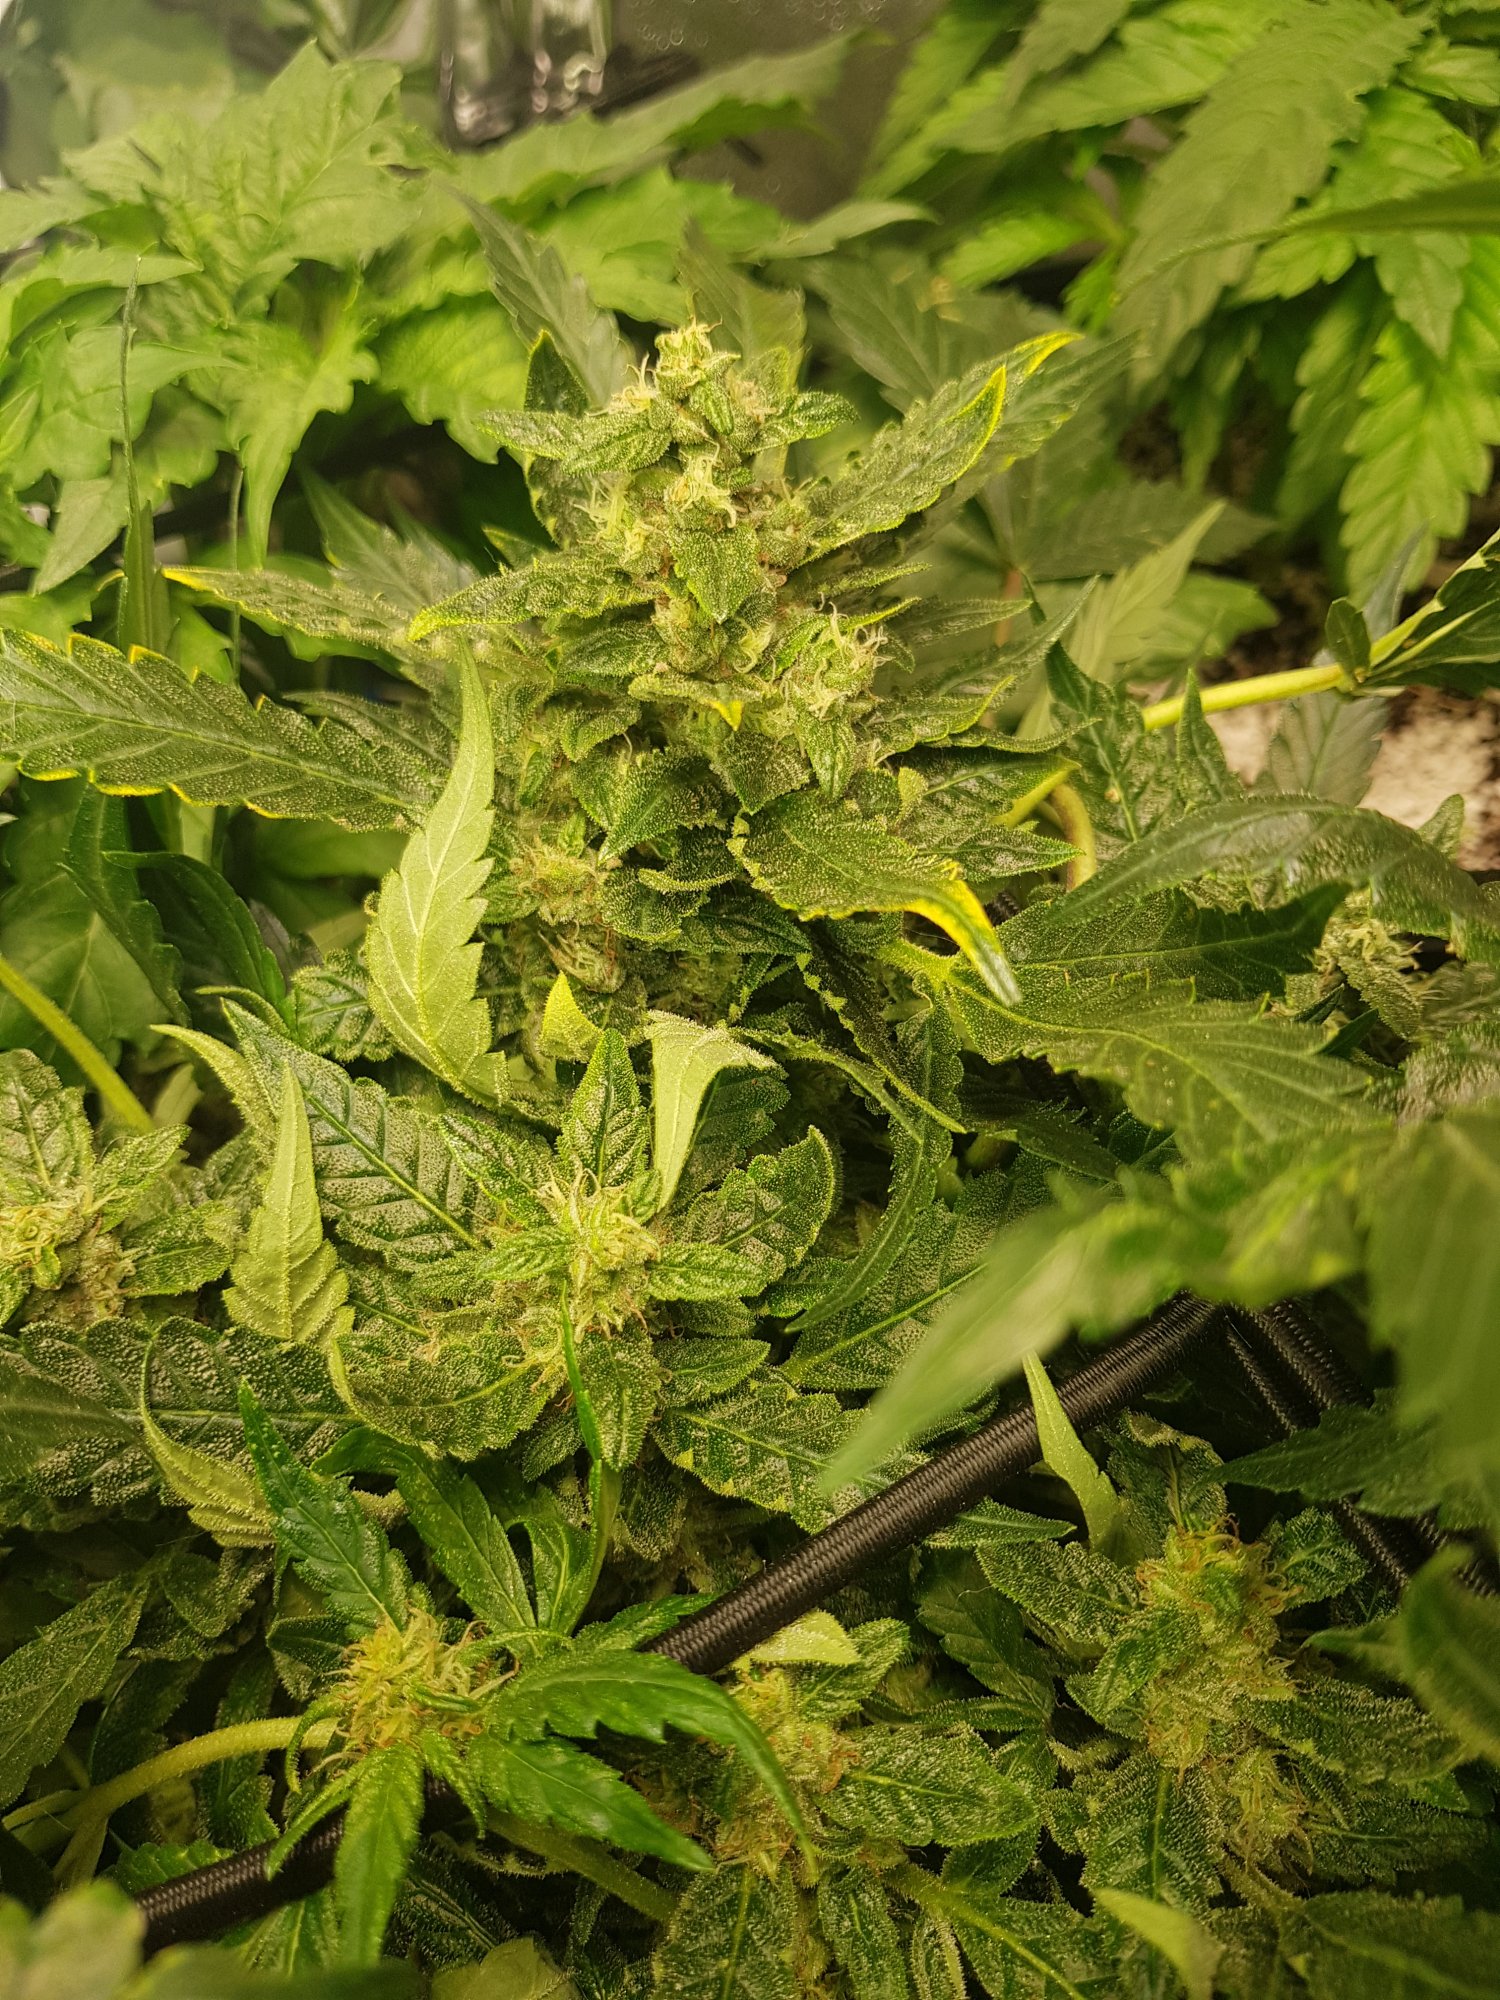 Nutrient deficiency or light stress